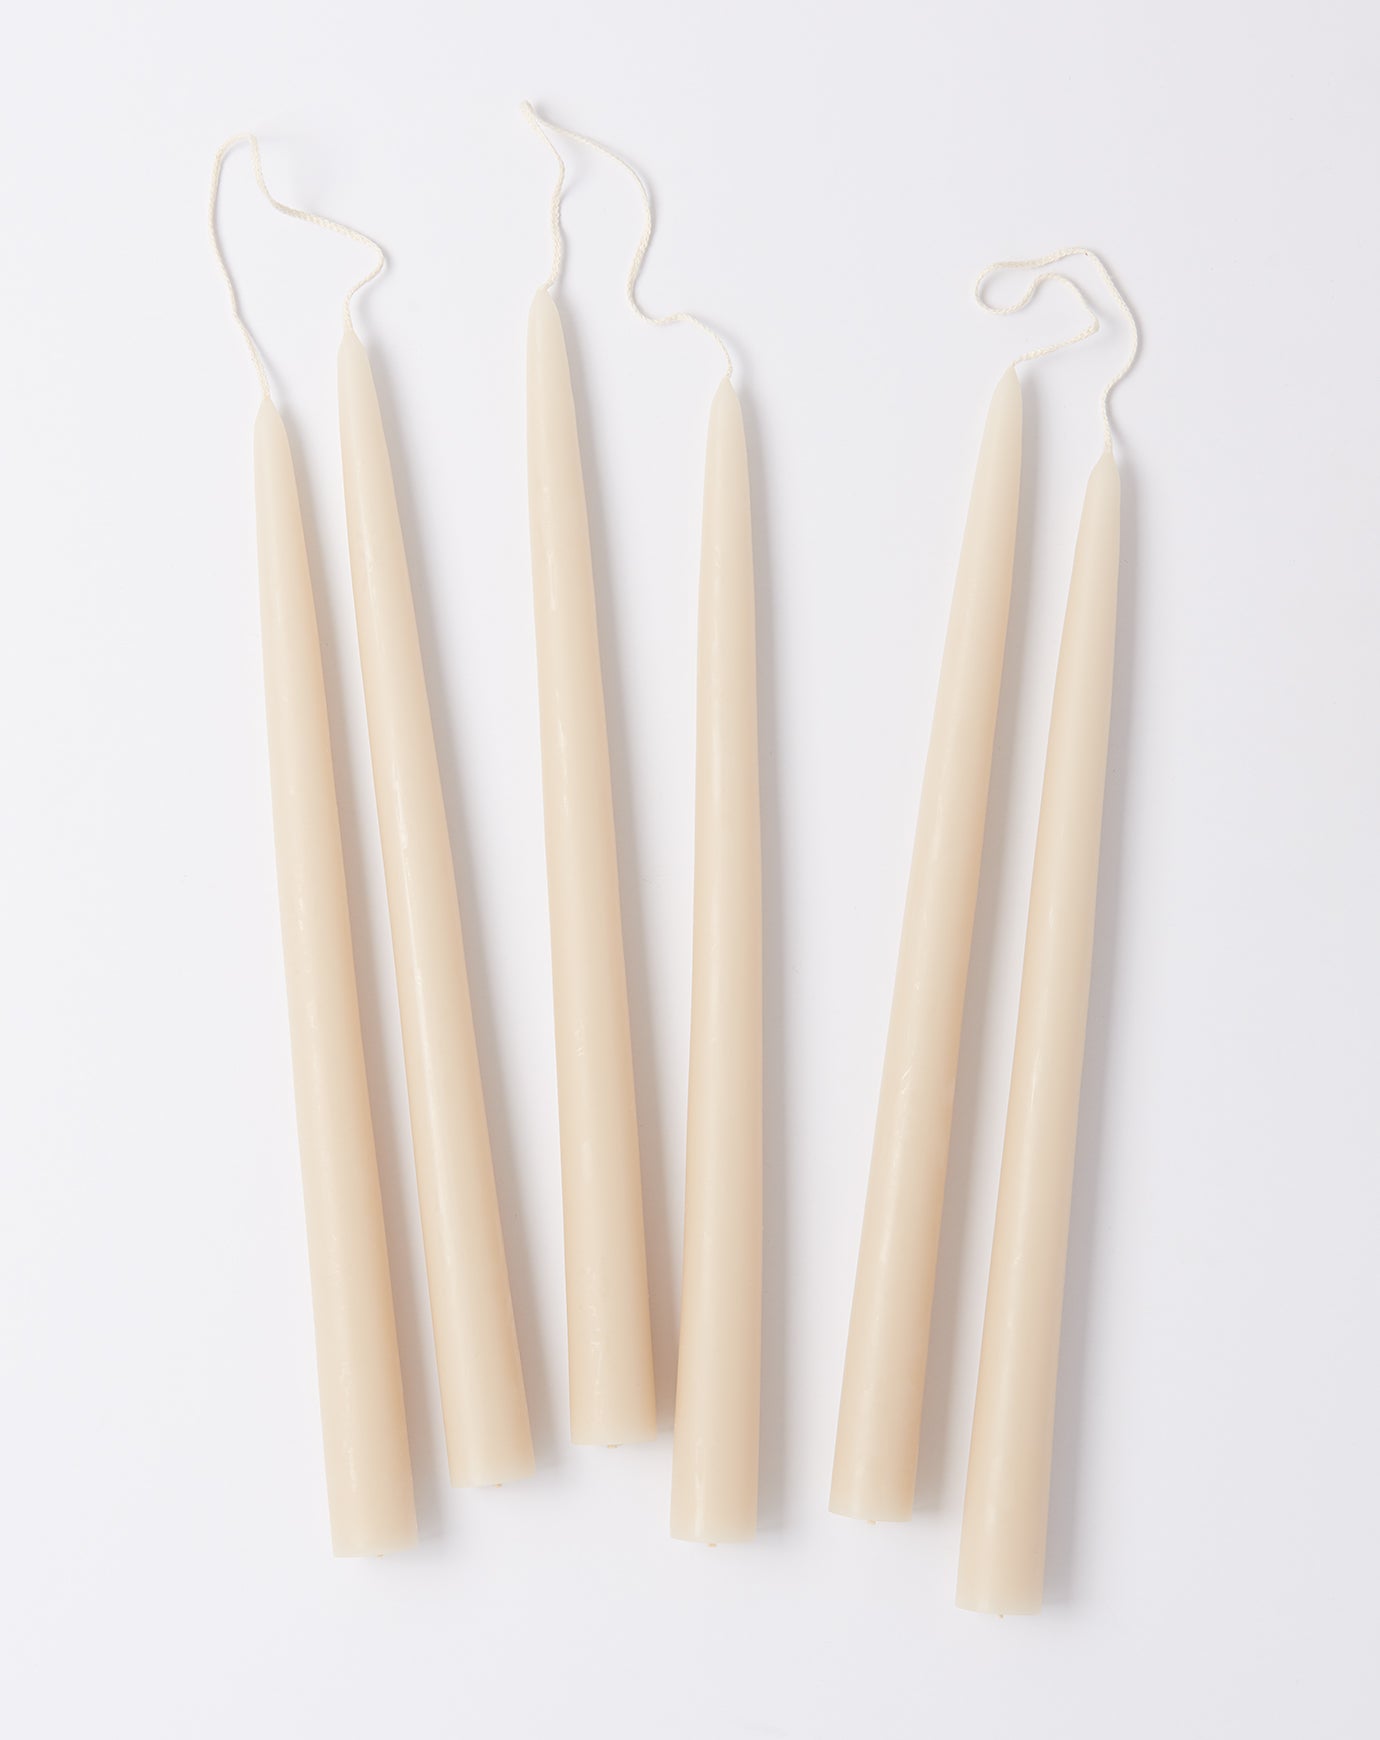 The Floral Society Pair of 12" Taper Candles in Parchment